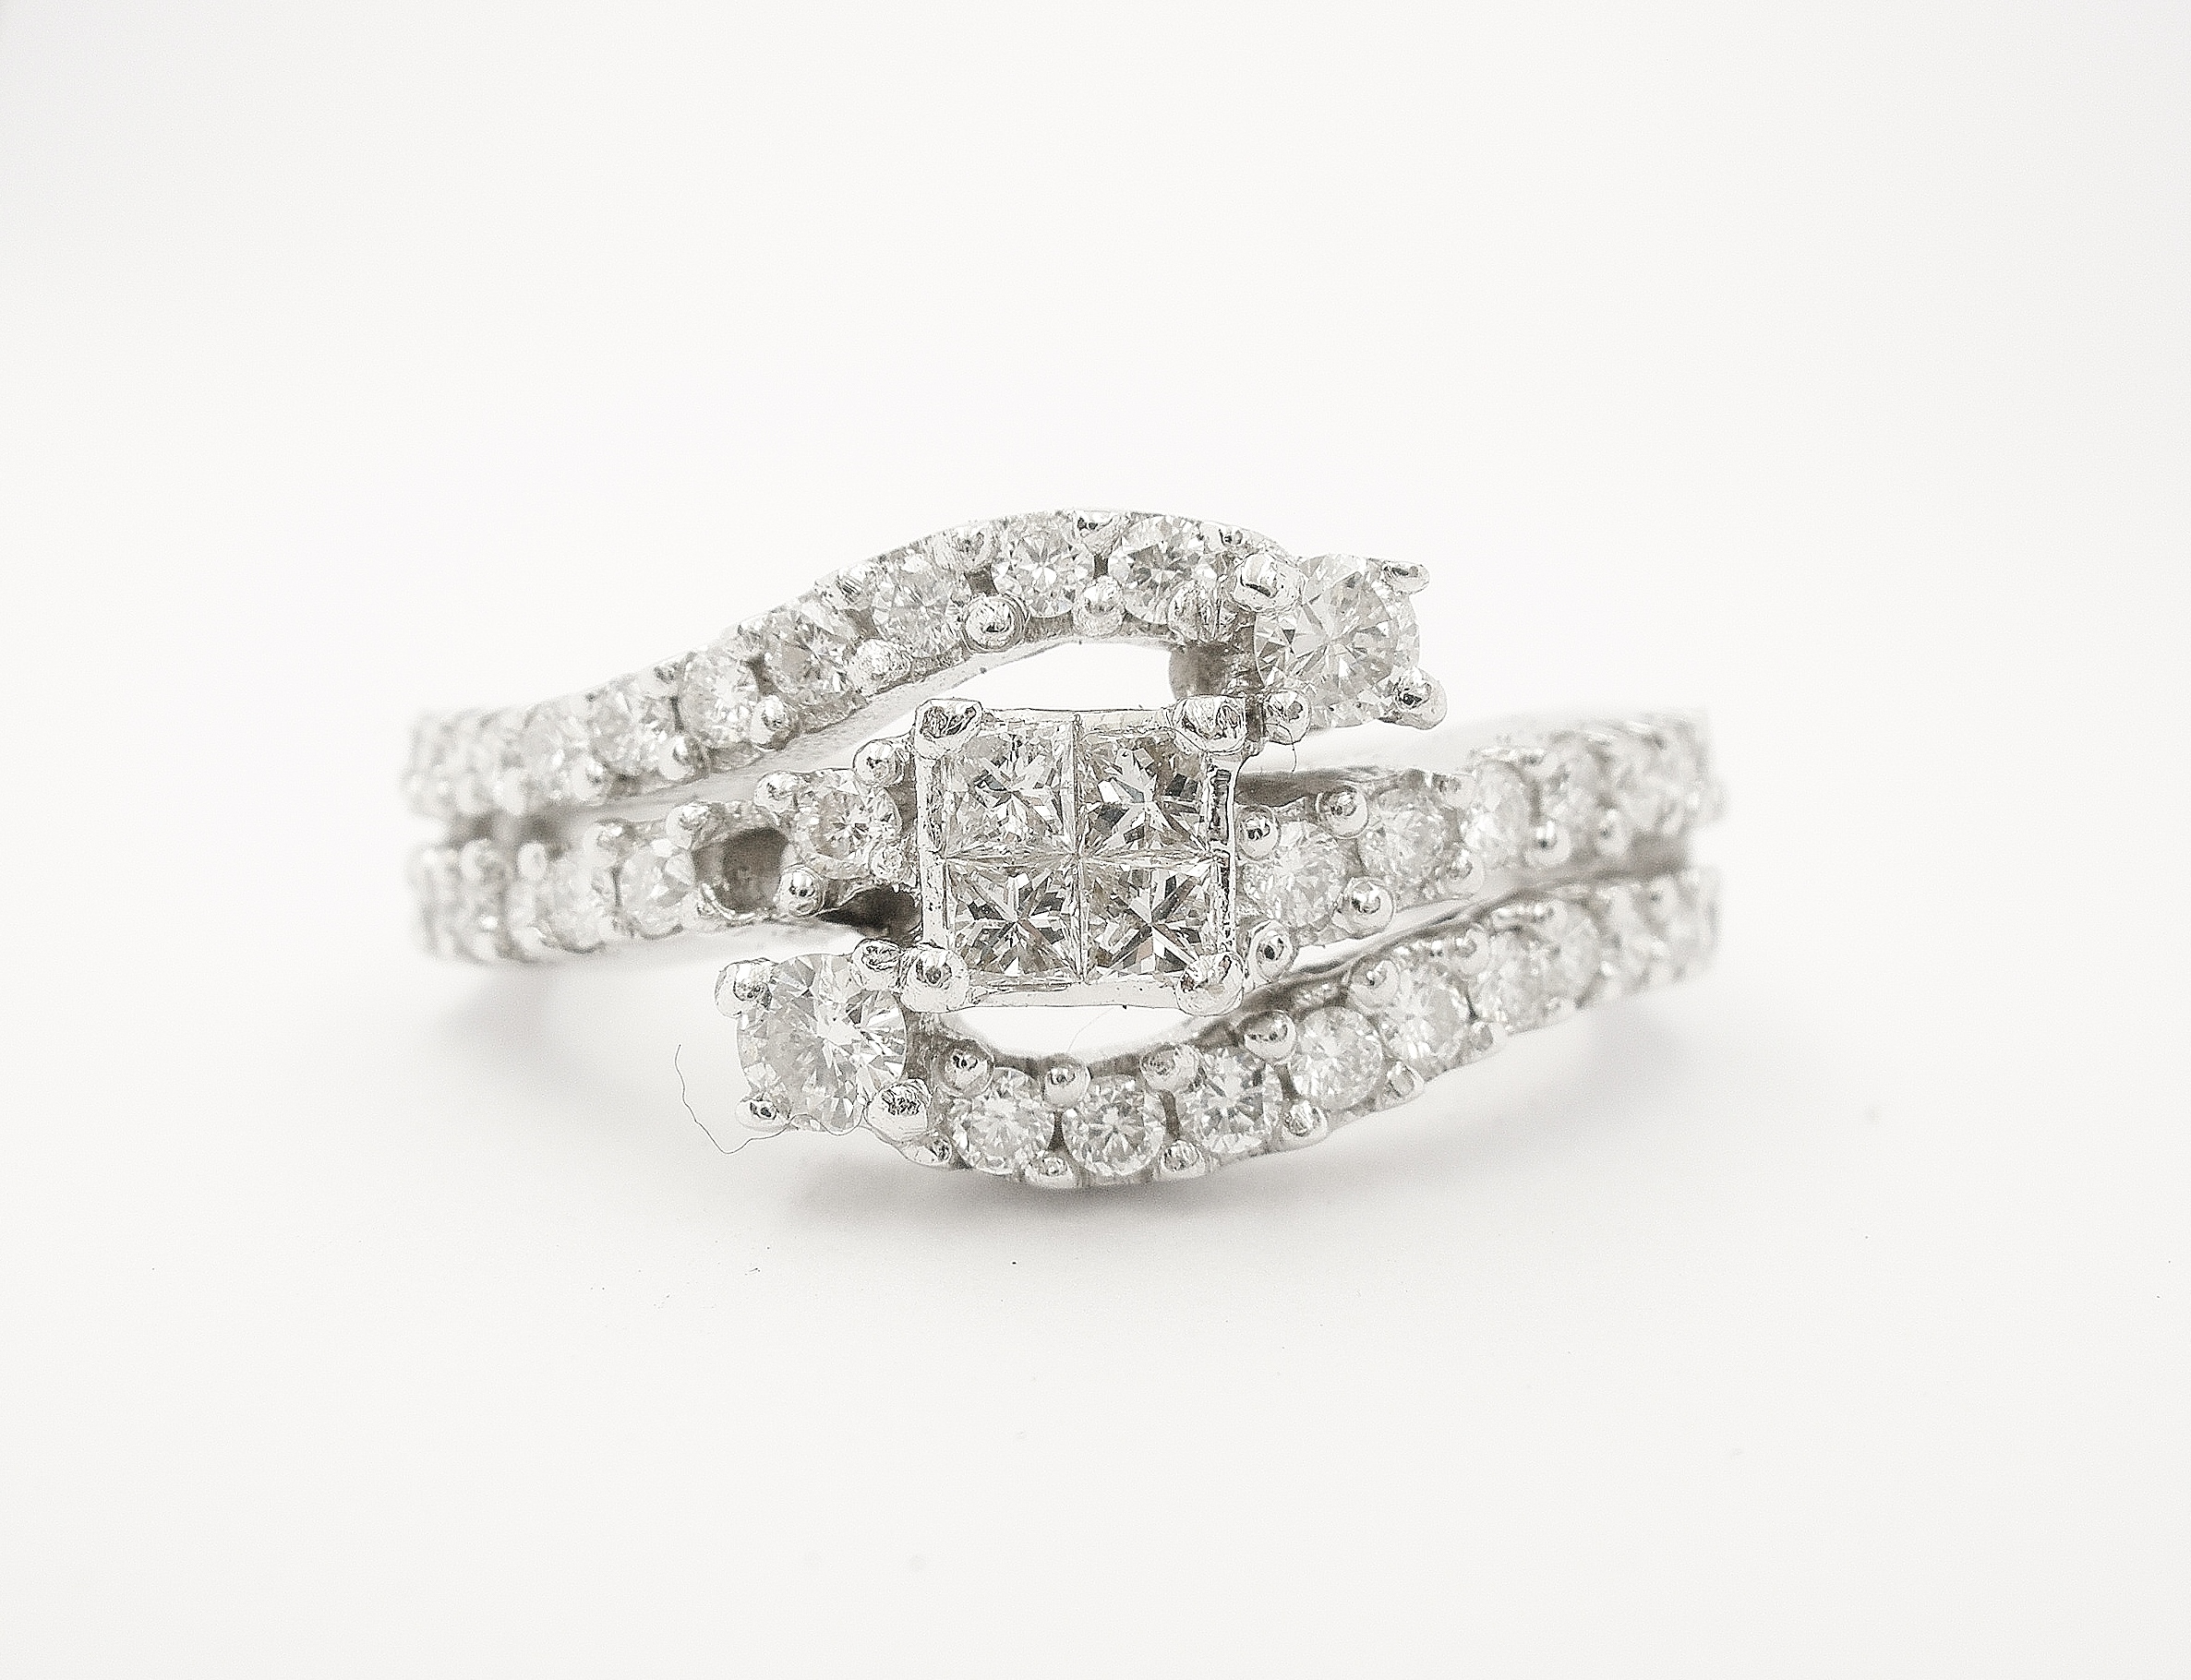 Original princess cut & brilliant cut diamond 18ct white gold ring bought abroad - diamonds repeatedly fell out.